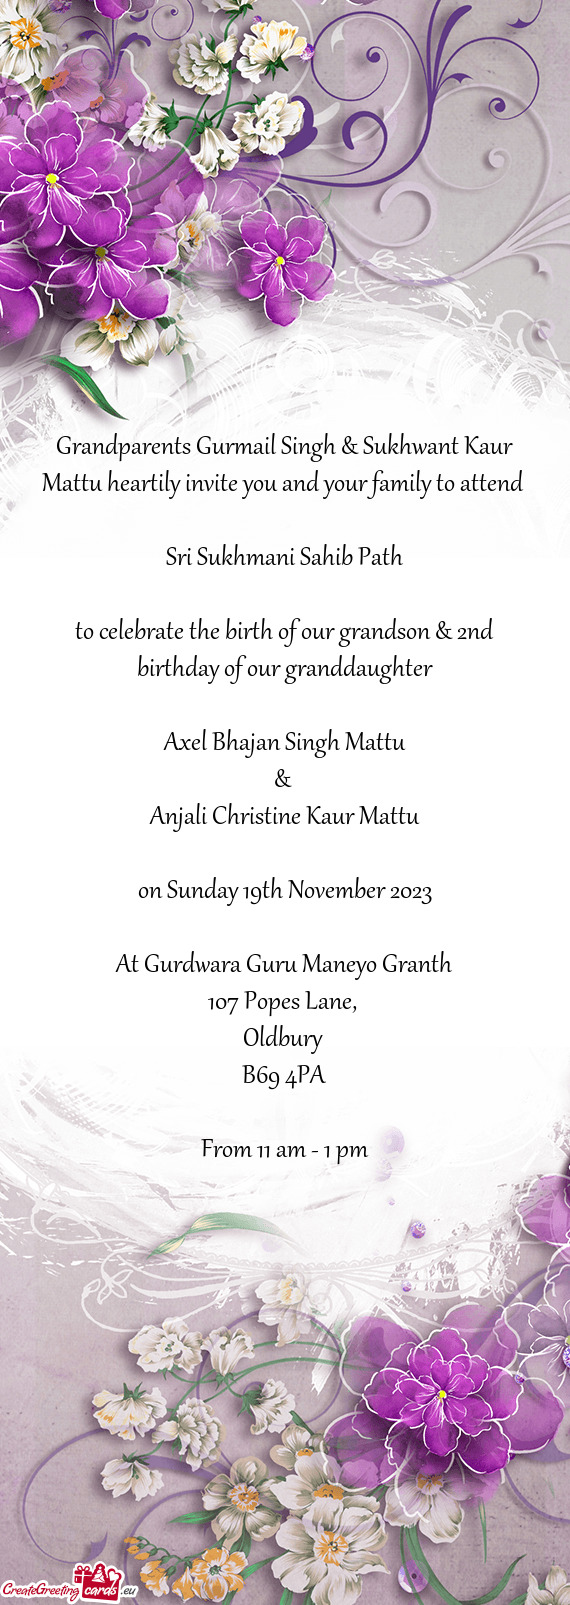 Grandparents Gurmail Singh & Sukhwant Kaur Mattu heartily invite you and your family to attend